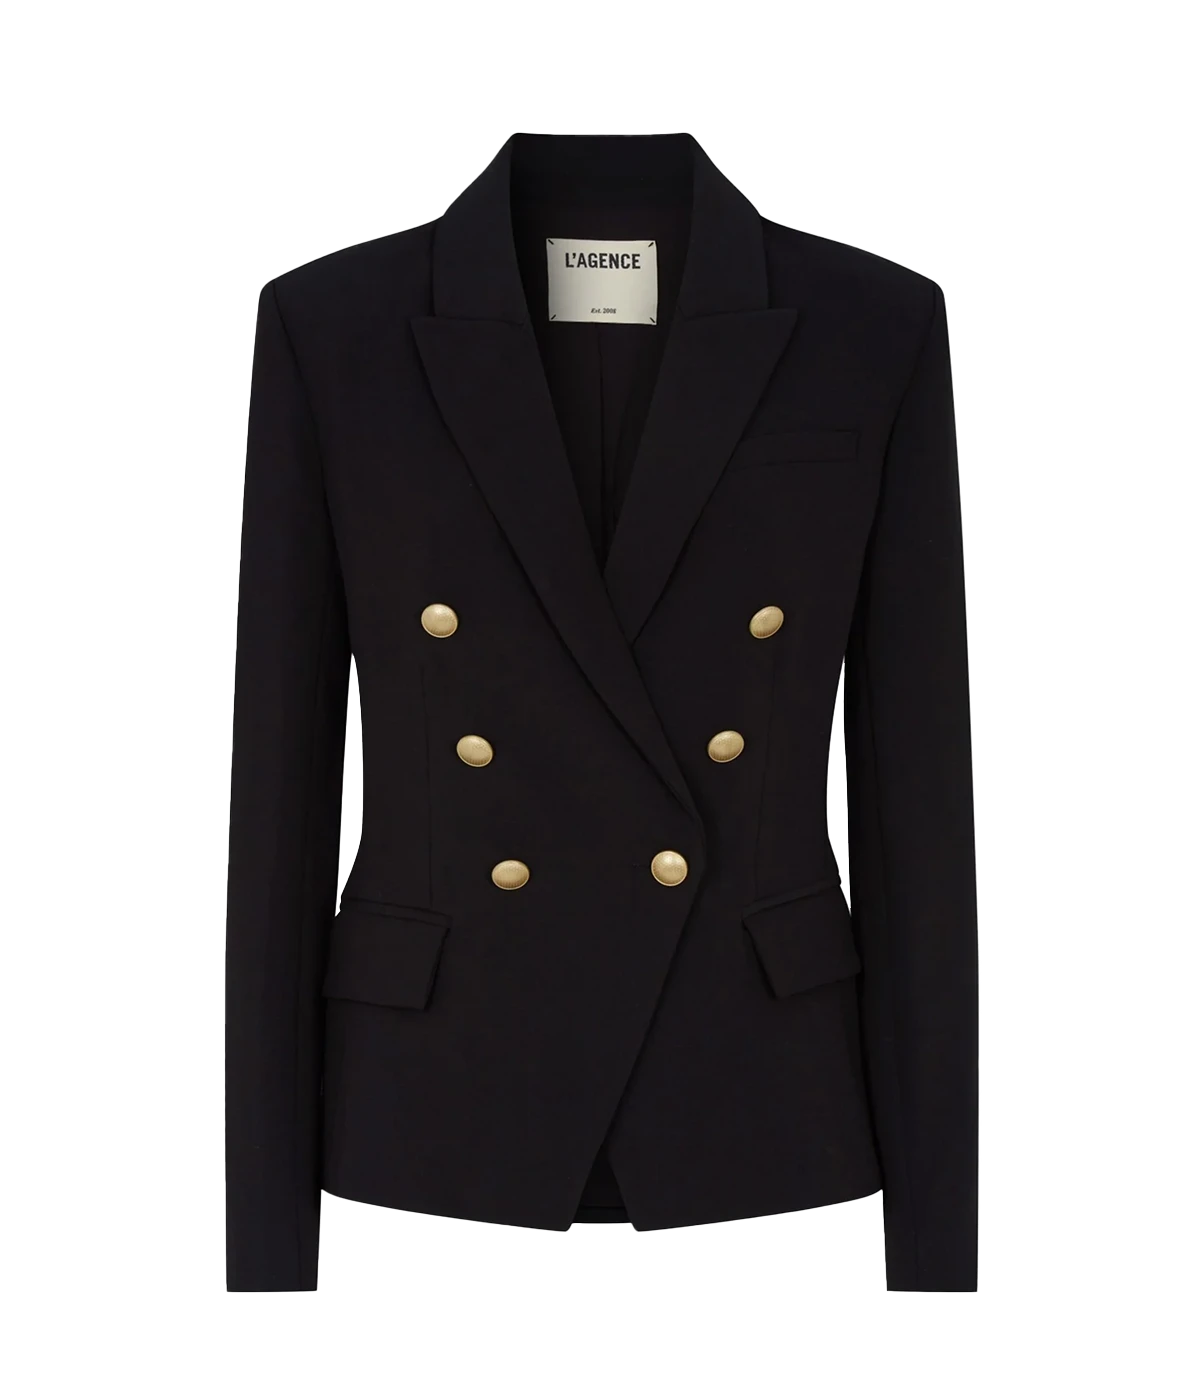 Image of a classic chic black blazer, with double breasted button closure, cotton, strong shoulders, peaked lapels, flat pockets, gold hard wear. Workwear, basic blazer, classic look, made in USA.  